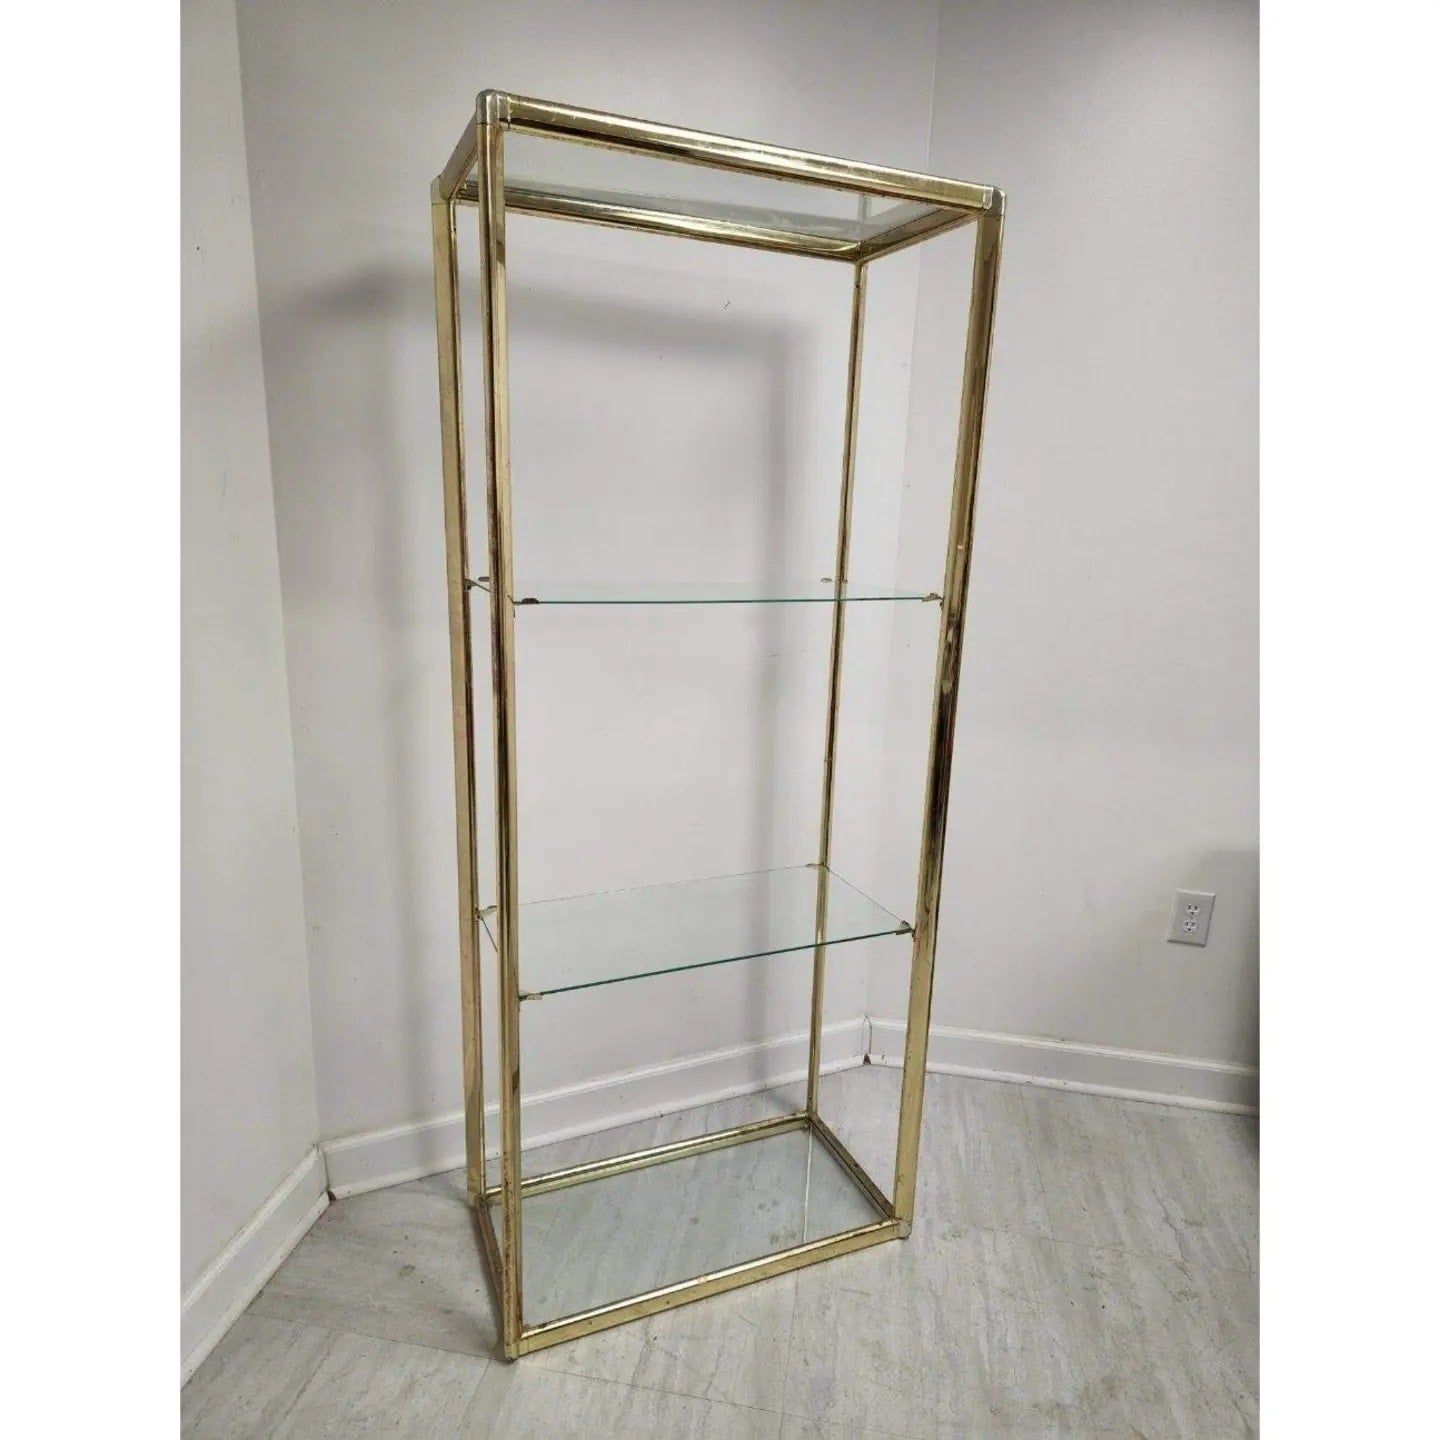 Vintage Brass & Glass Etagere Display Shelving Unit – Past Chapters &  Spinoff Records RVA